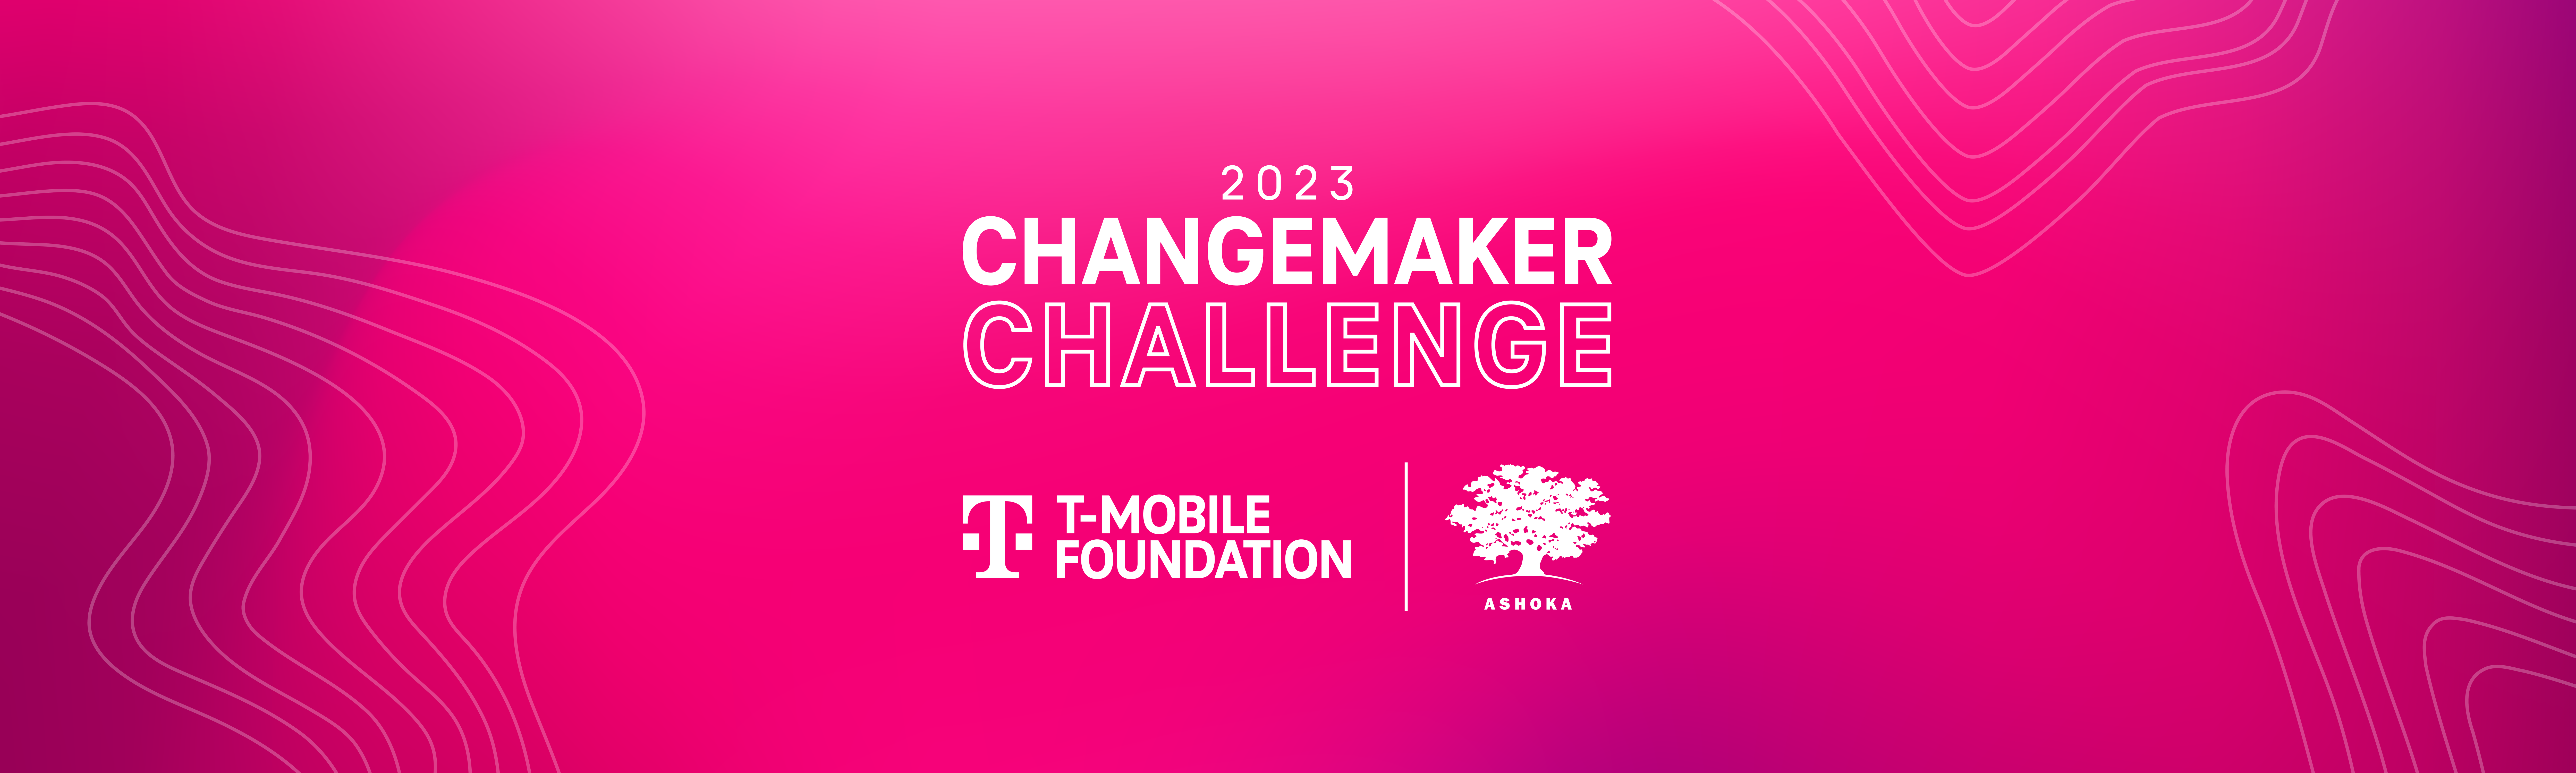 Image with Magenta background and white lettering saying "2023 Changemaker Challenge" in the center and "T-Mobile Foundation | Ashoka" at the bottom center